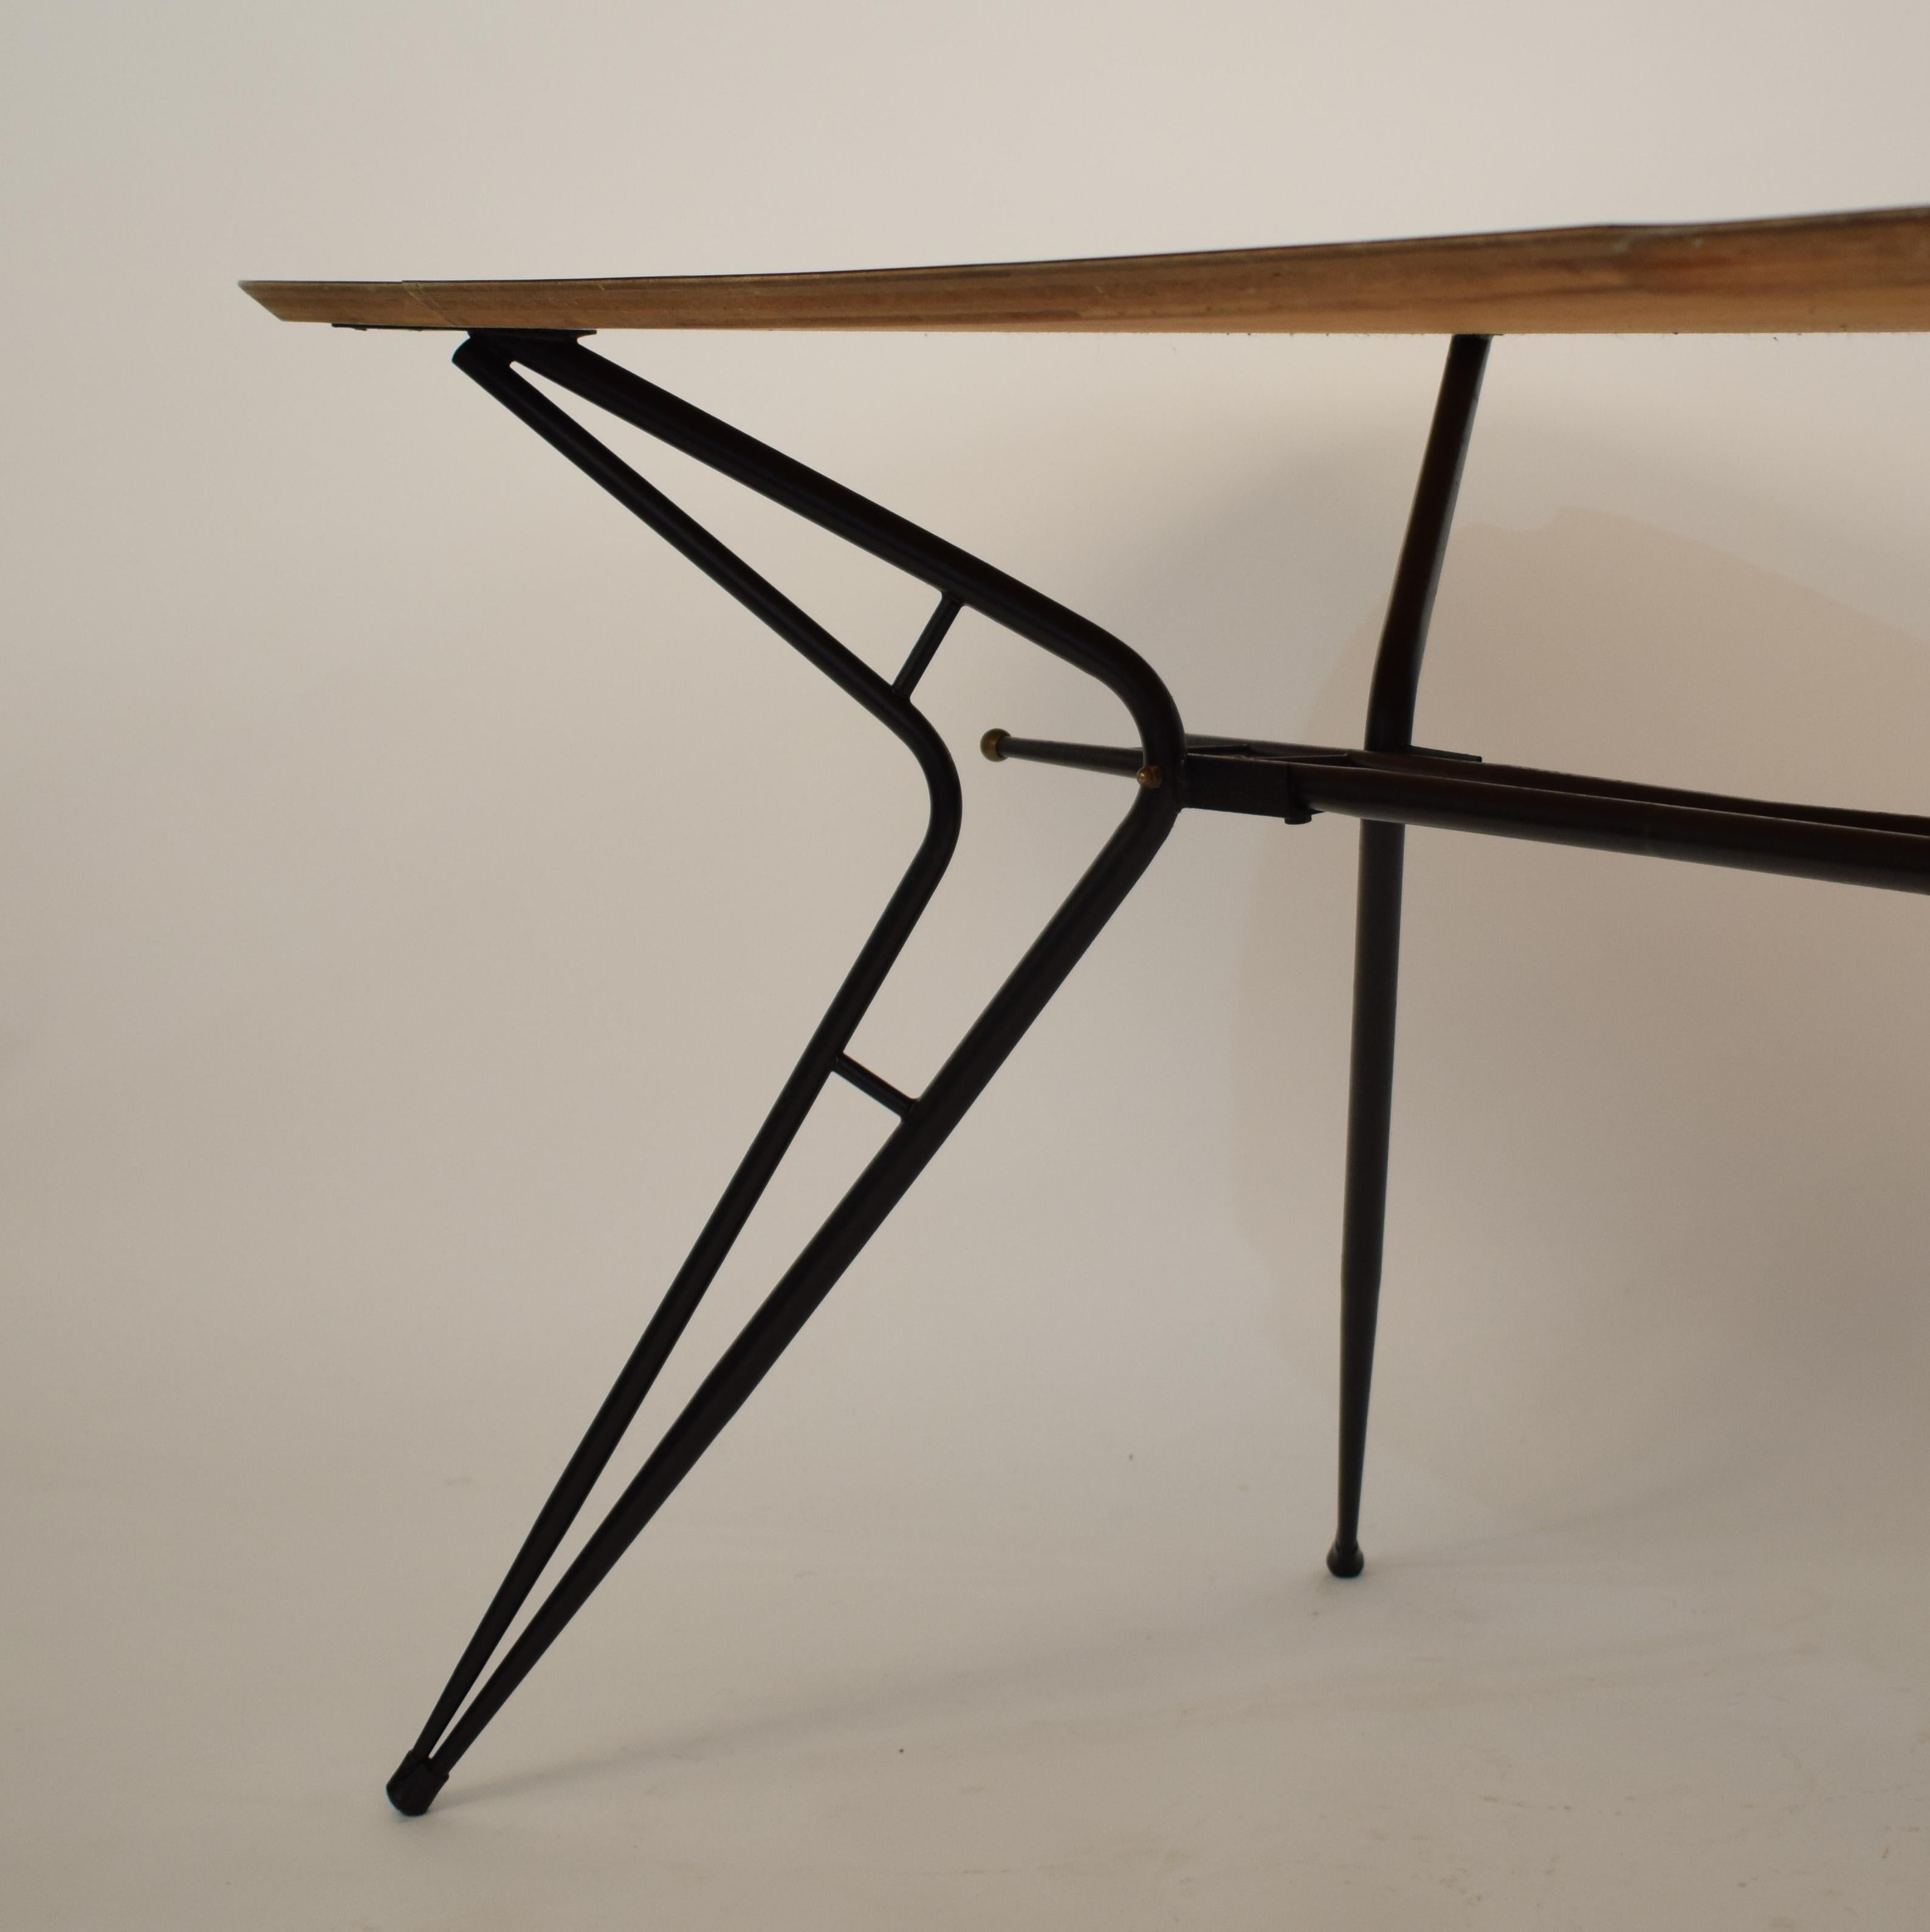 Midcentury Italian Black and White Dining Table Attributed to Ico Parisi, 1958 For Sale 5